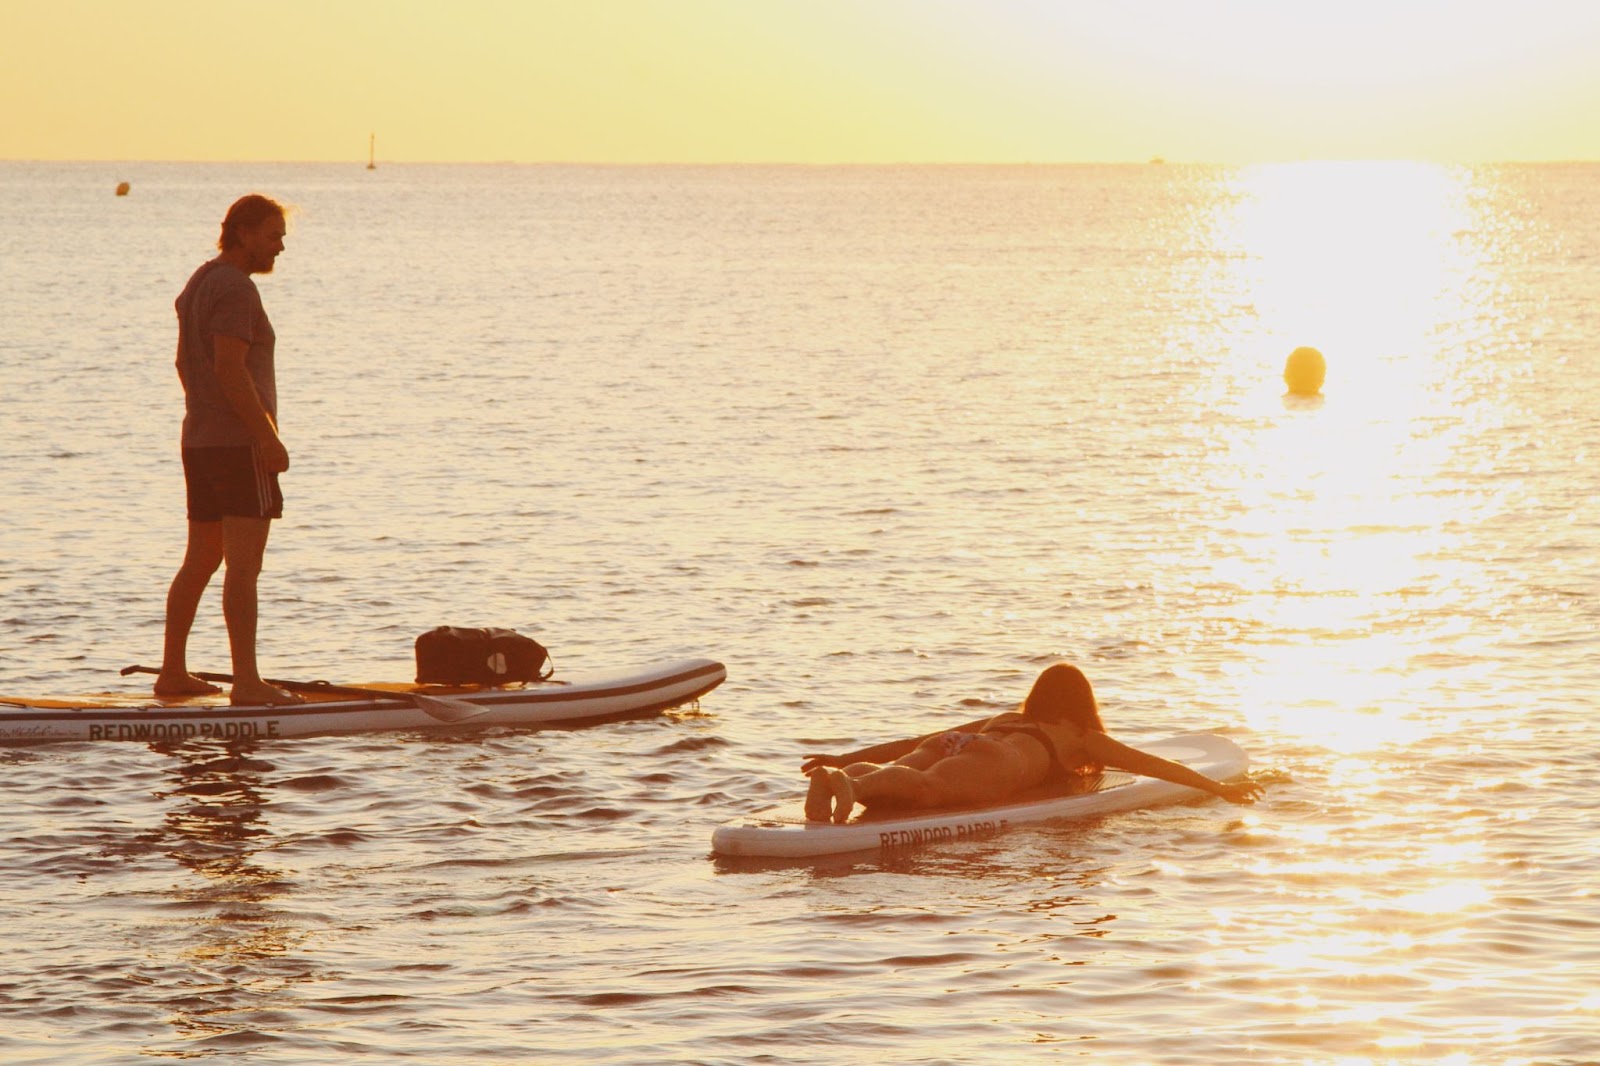 A man and a woman paddle boarding together at sunset.